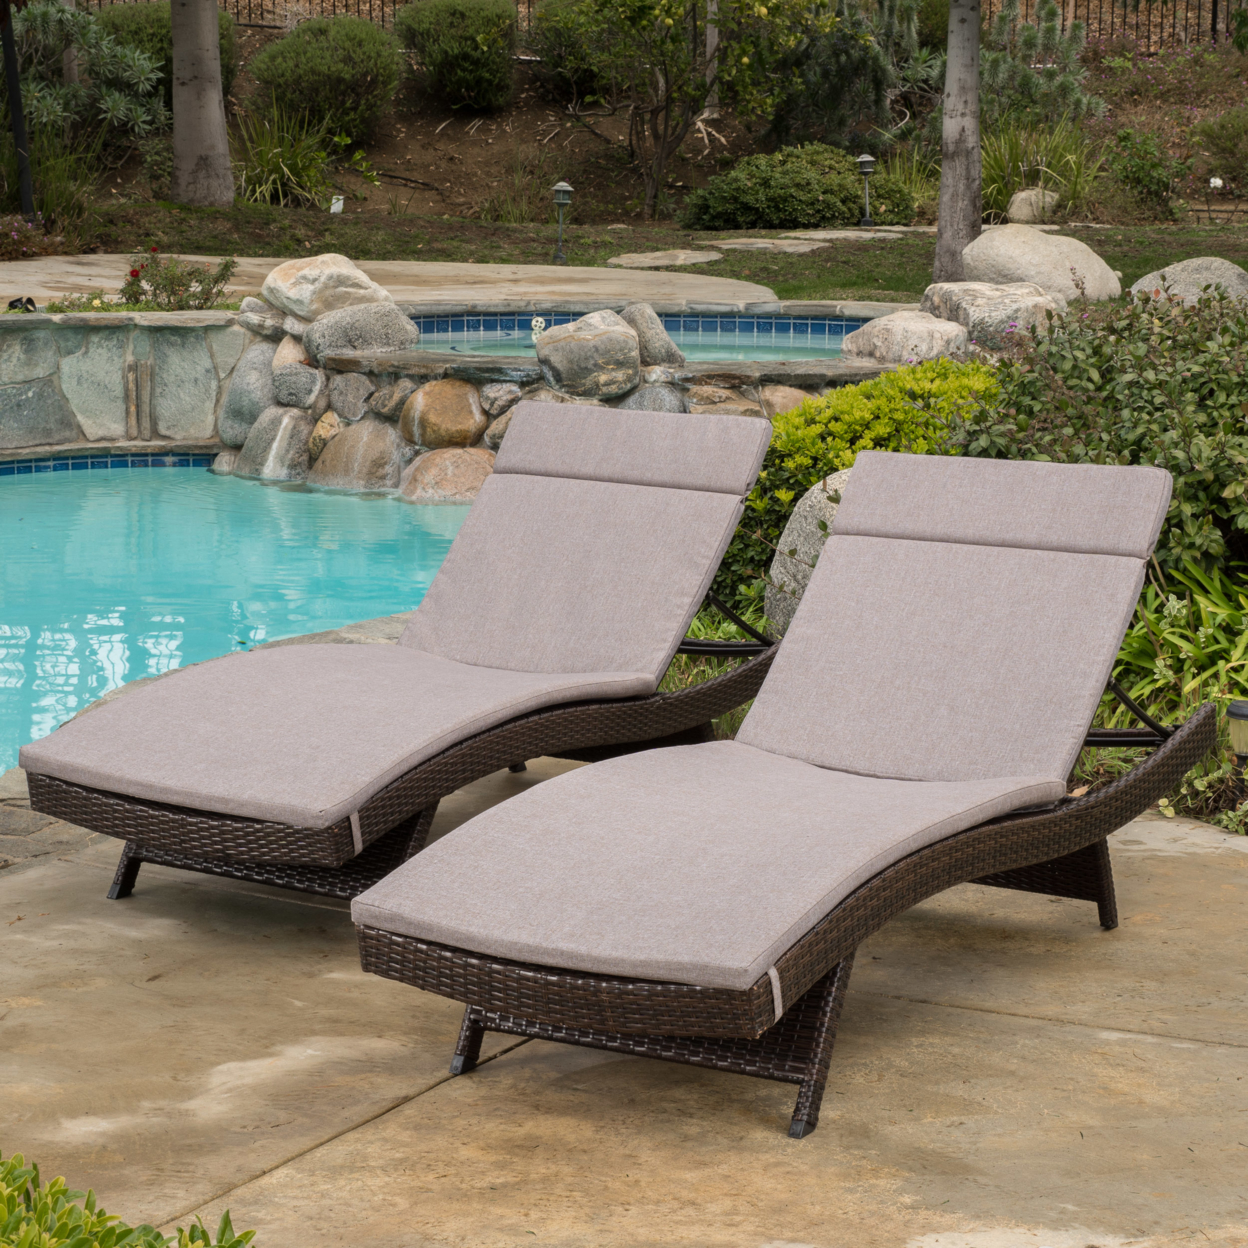 Lakeport Outdoor Adjustable Chaise Lounge Chairs With Cushions (set Of 2) - Charcoal Cushion